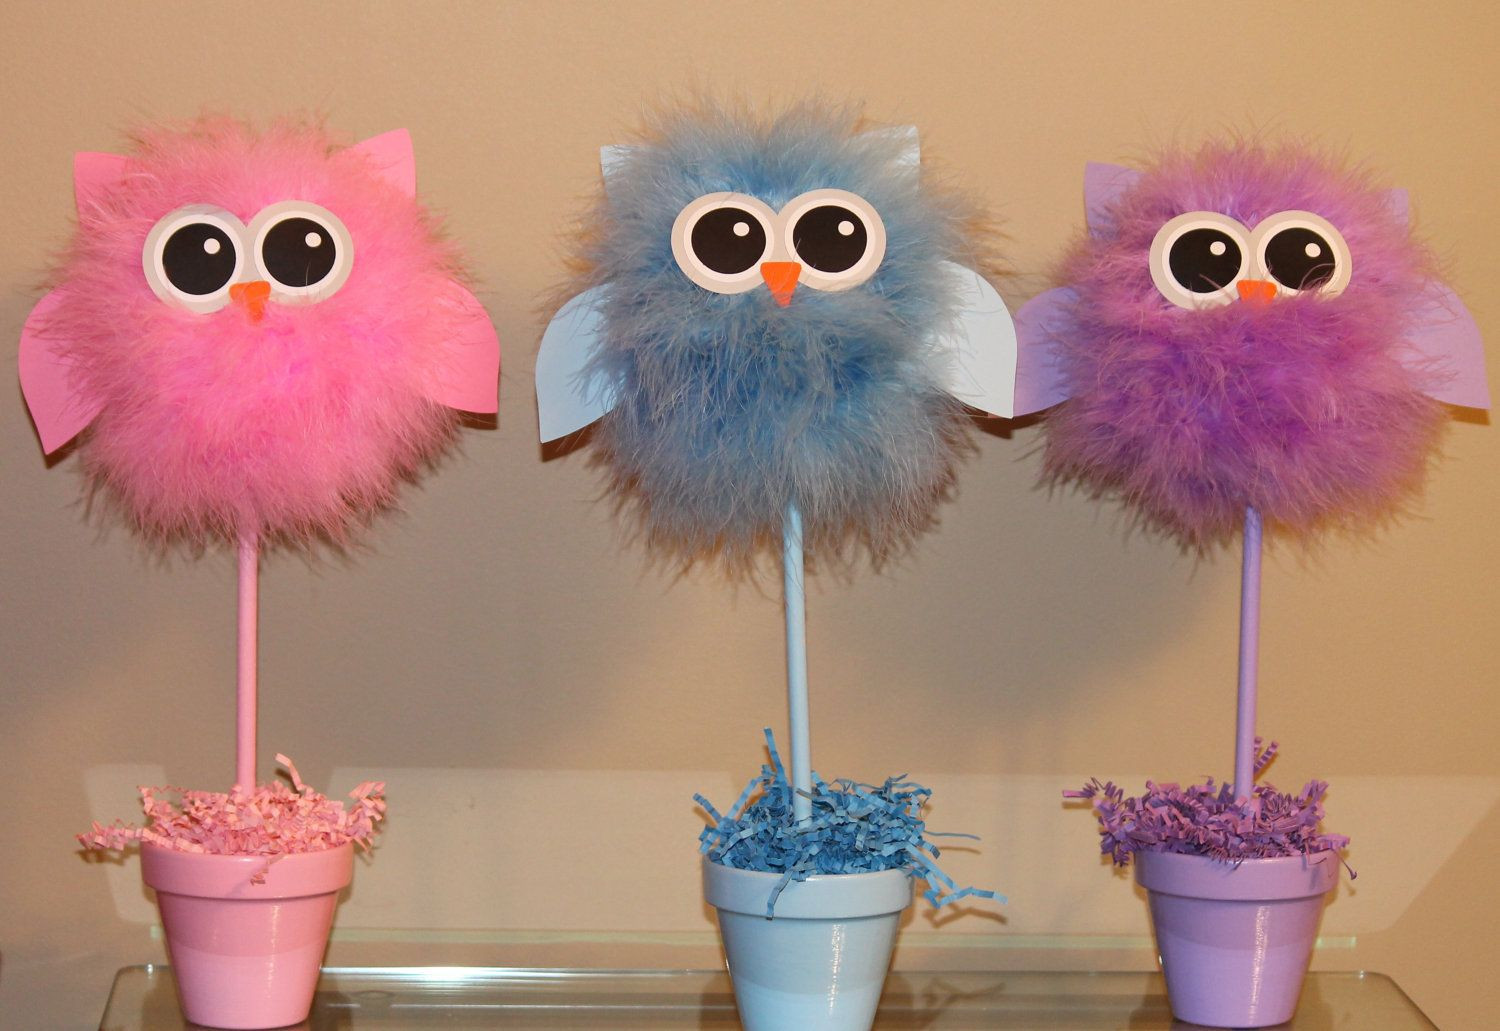 Baby Owls Decor
 Owl centerpiece and party decoration choice of one